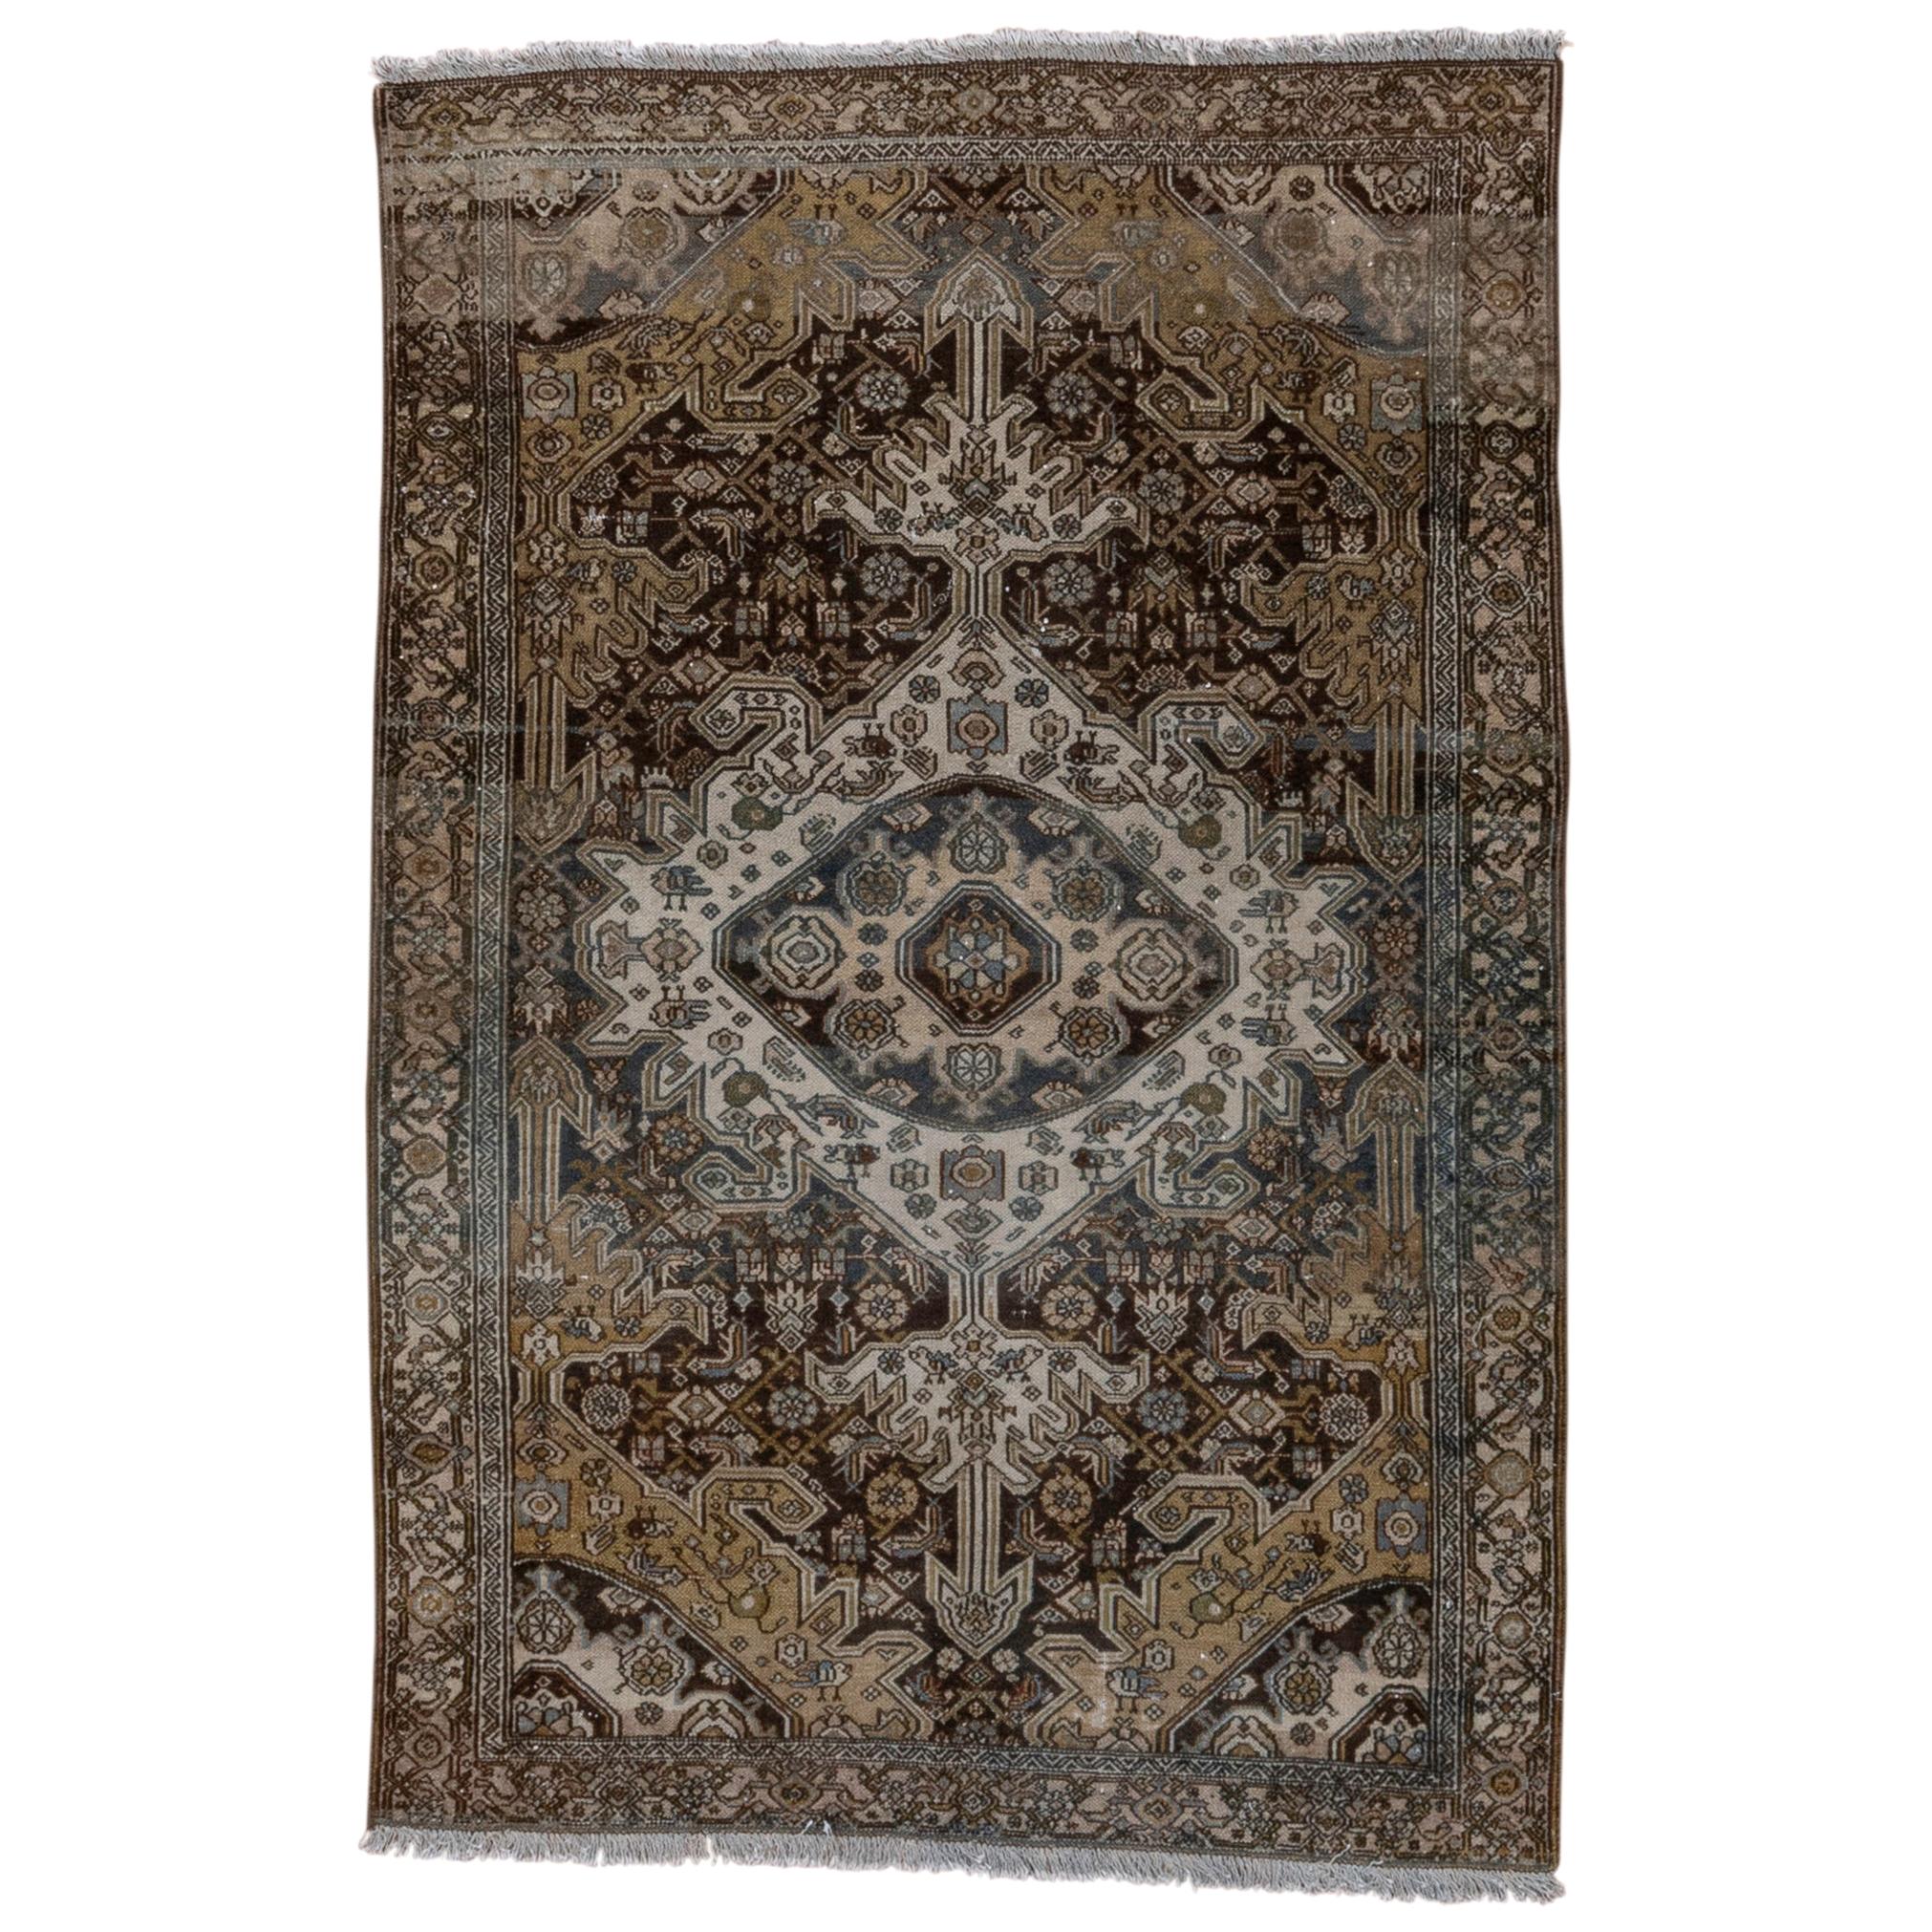 Antique Brown Persian Malayer Rug